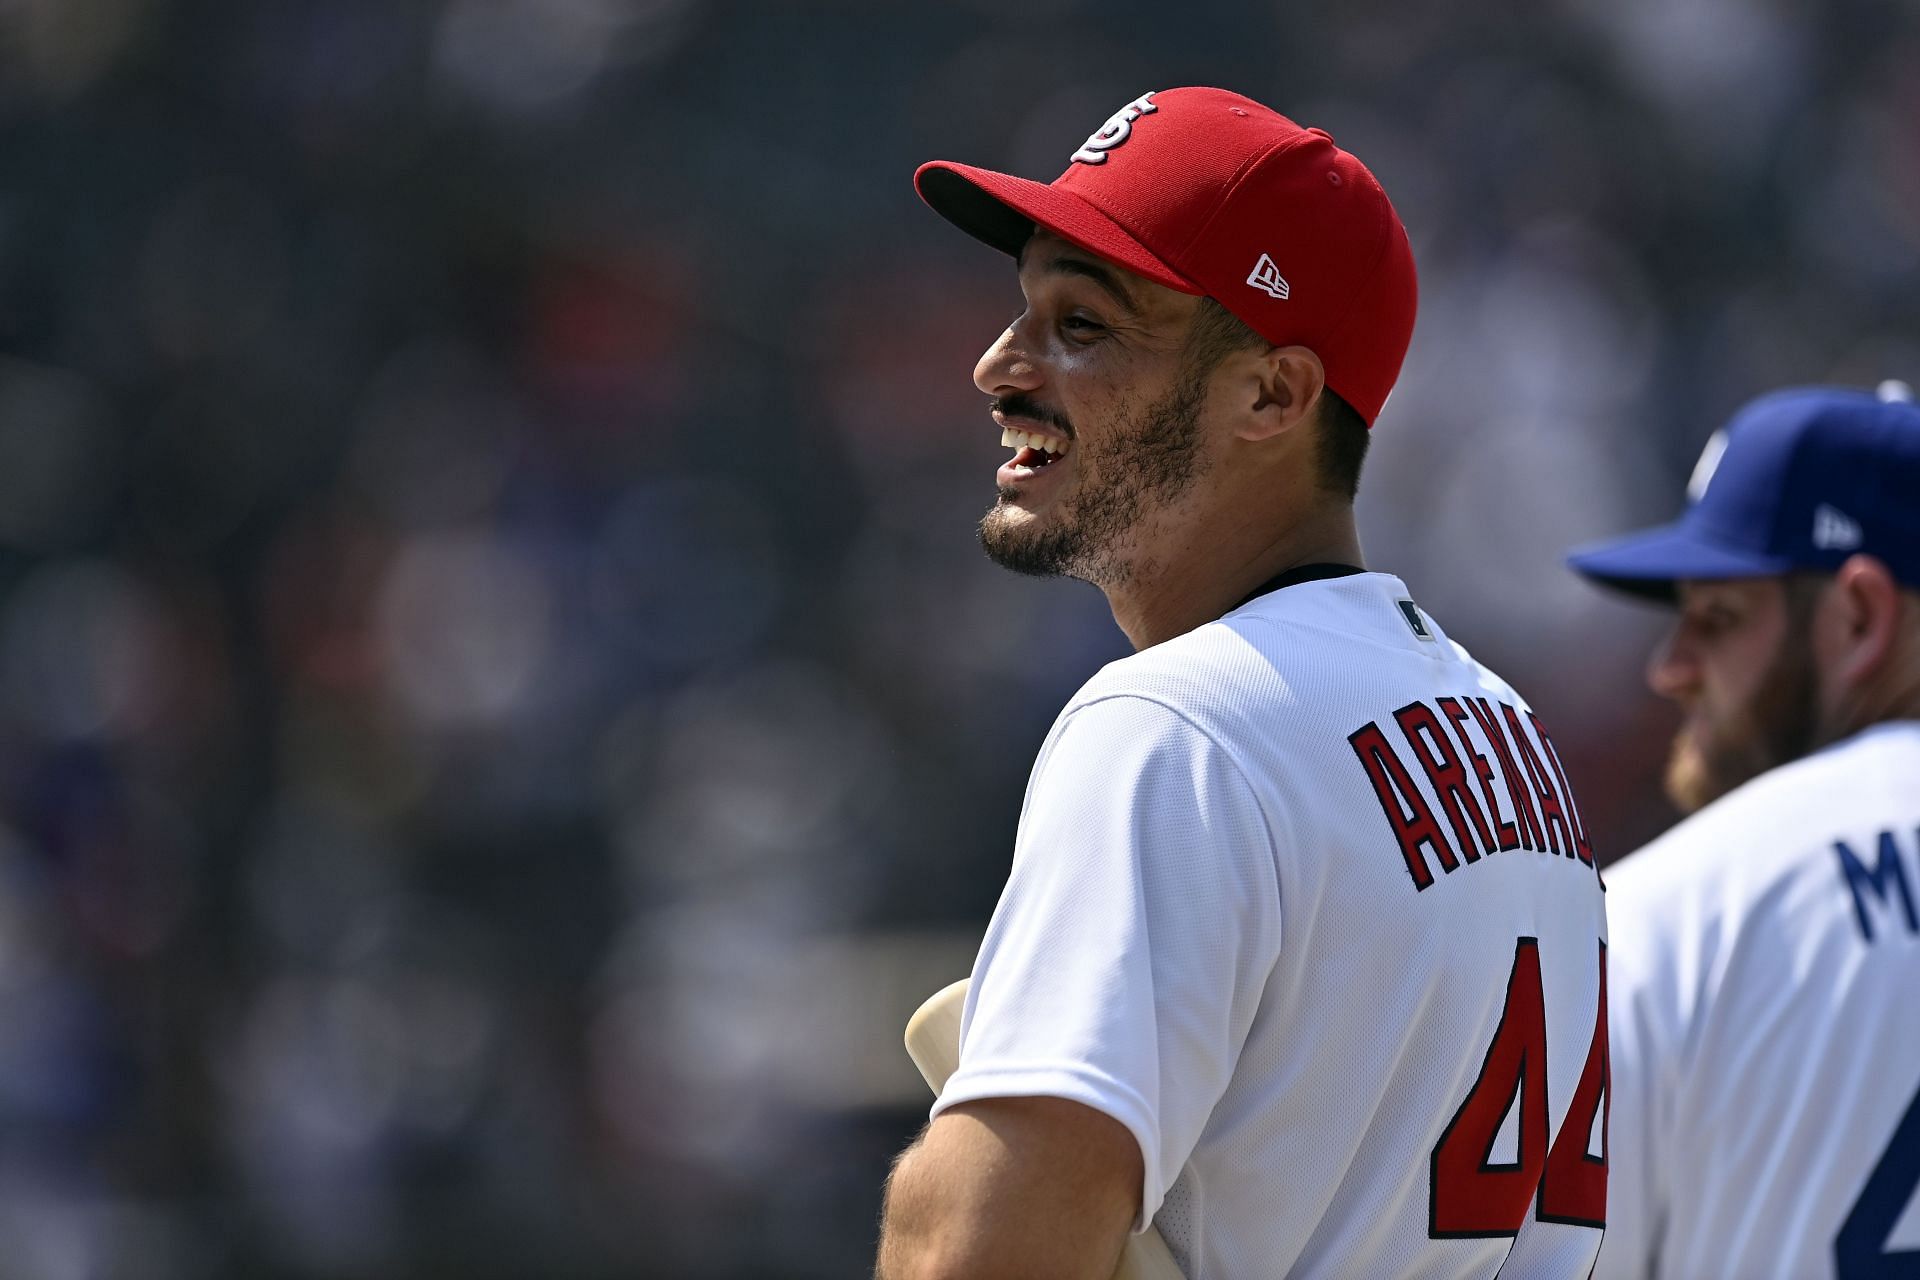 St. Louis Cardinals third baseman Arenado started a bench-clearing brawl against the Mets on April 27.